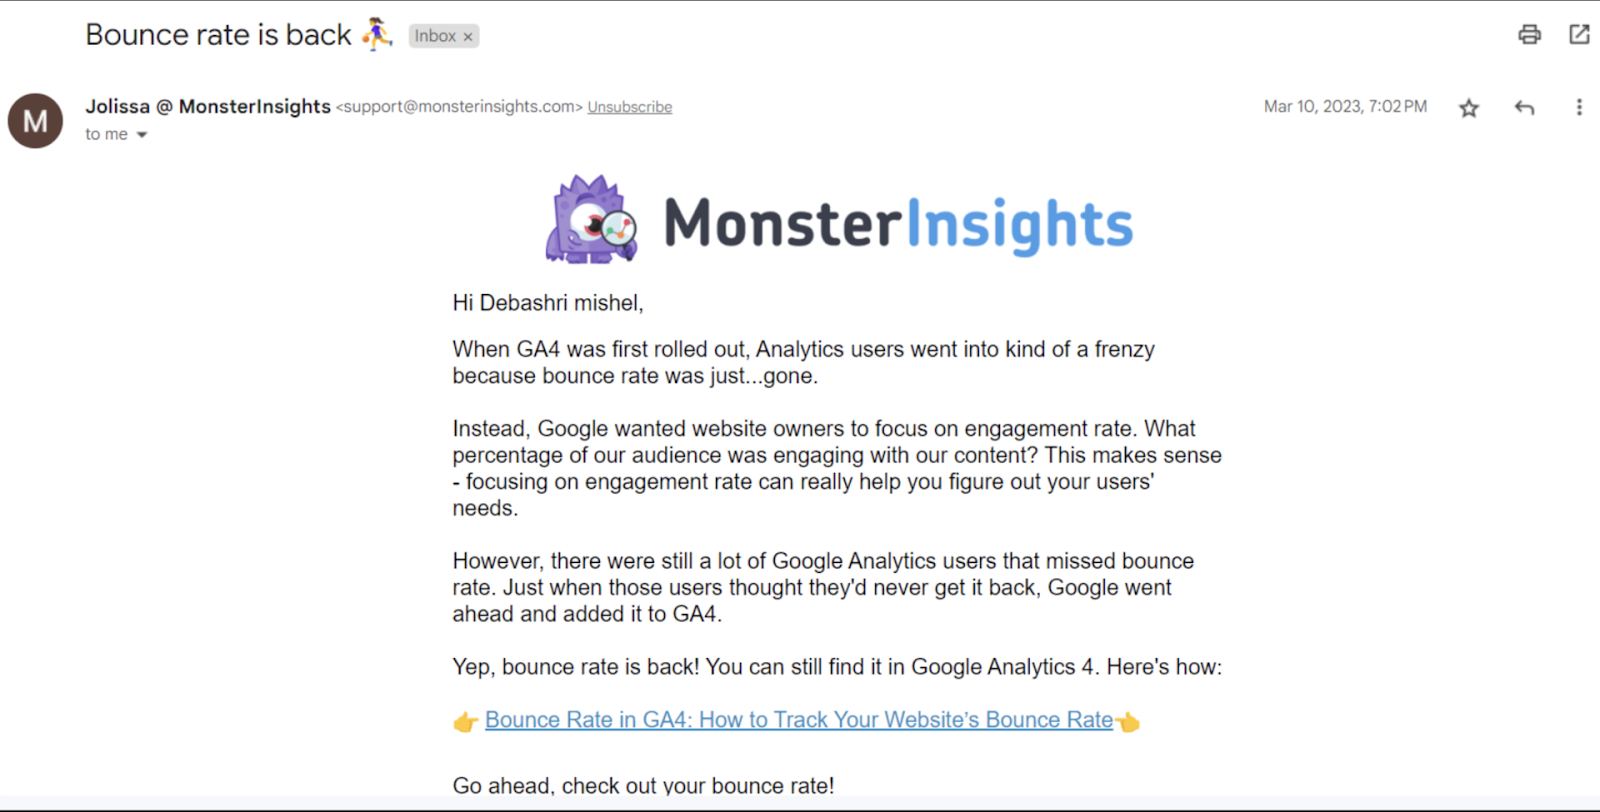 MonsterInsights b2b email marketing example